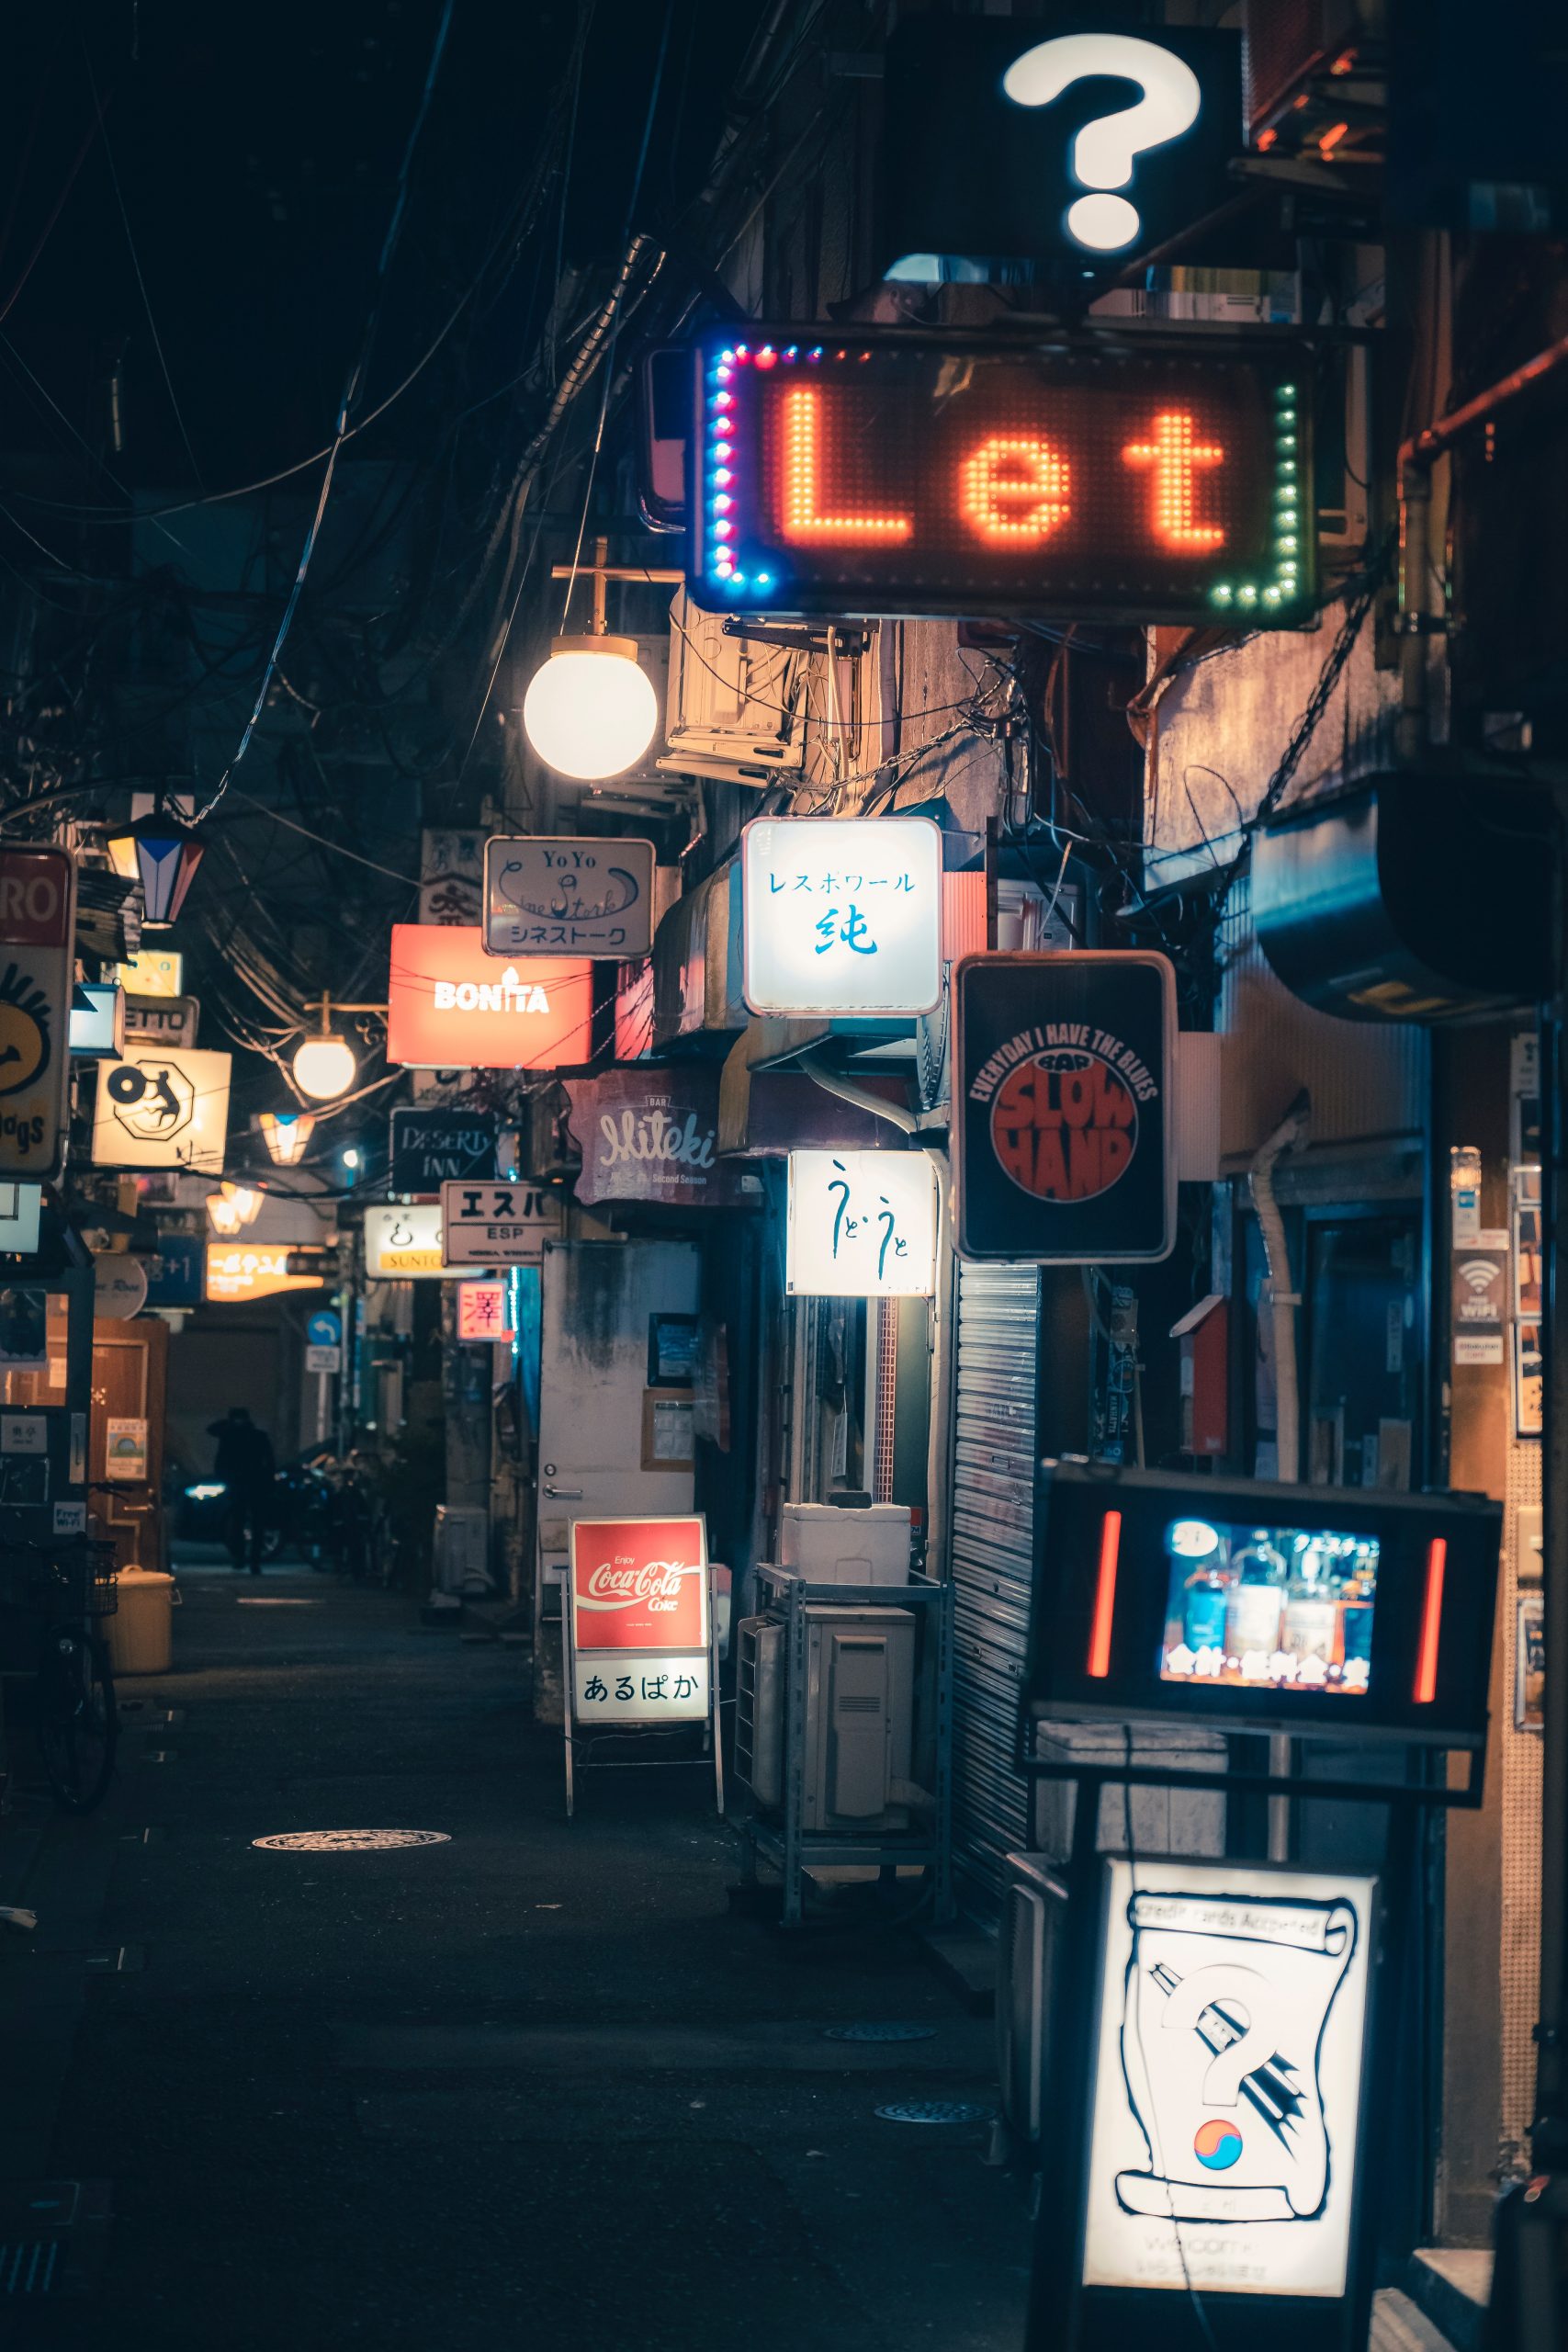 Golden Gai streets lined with bars